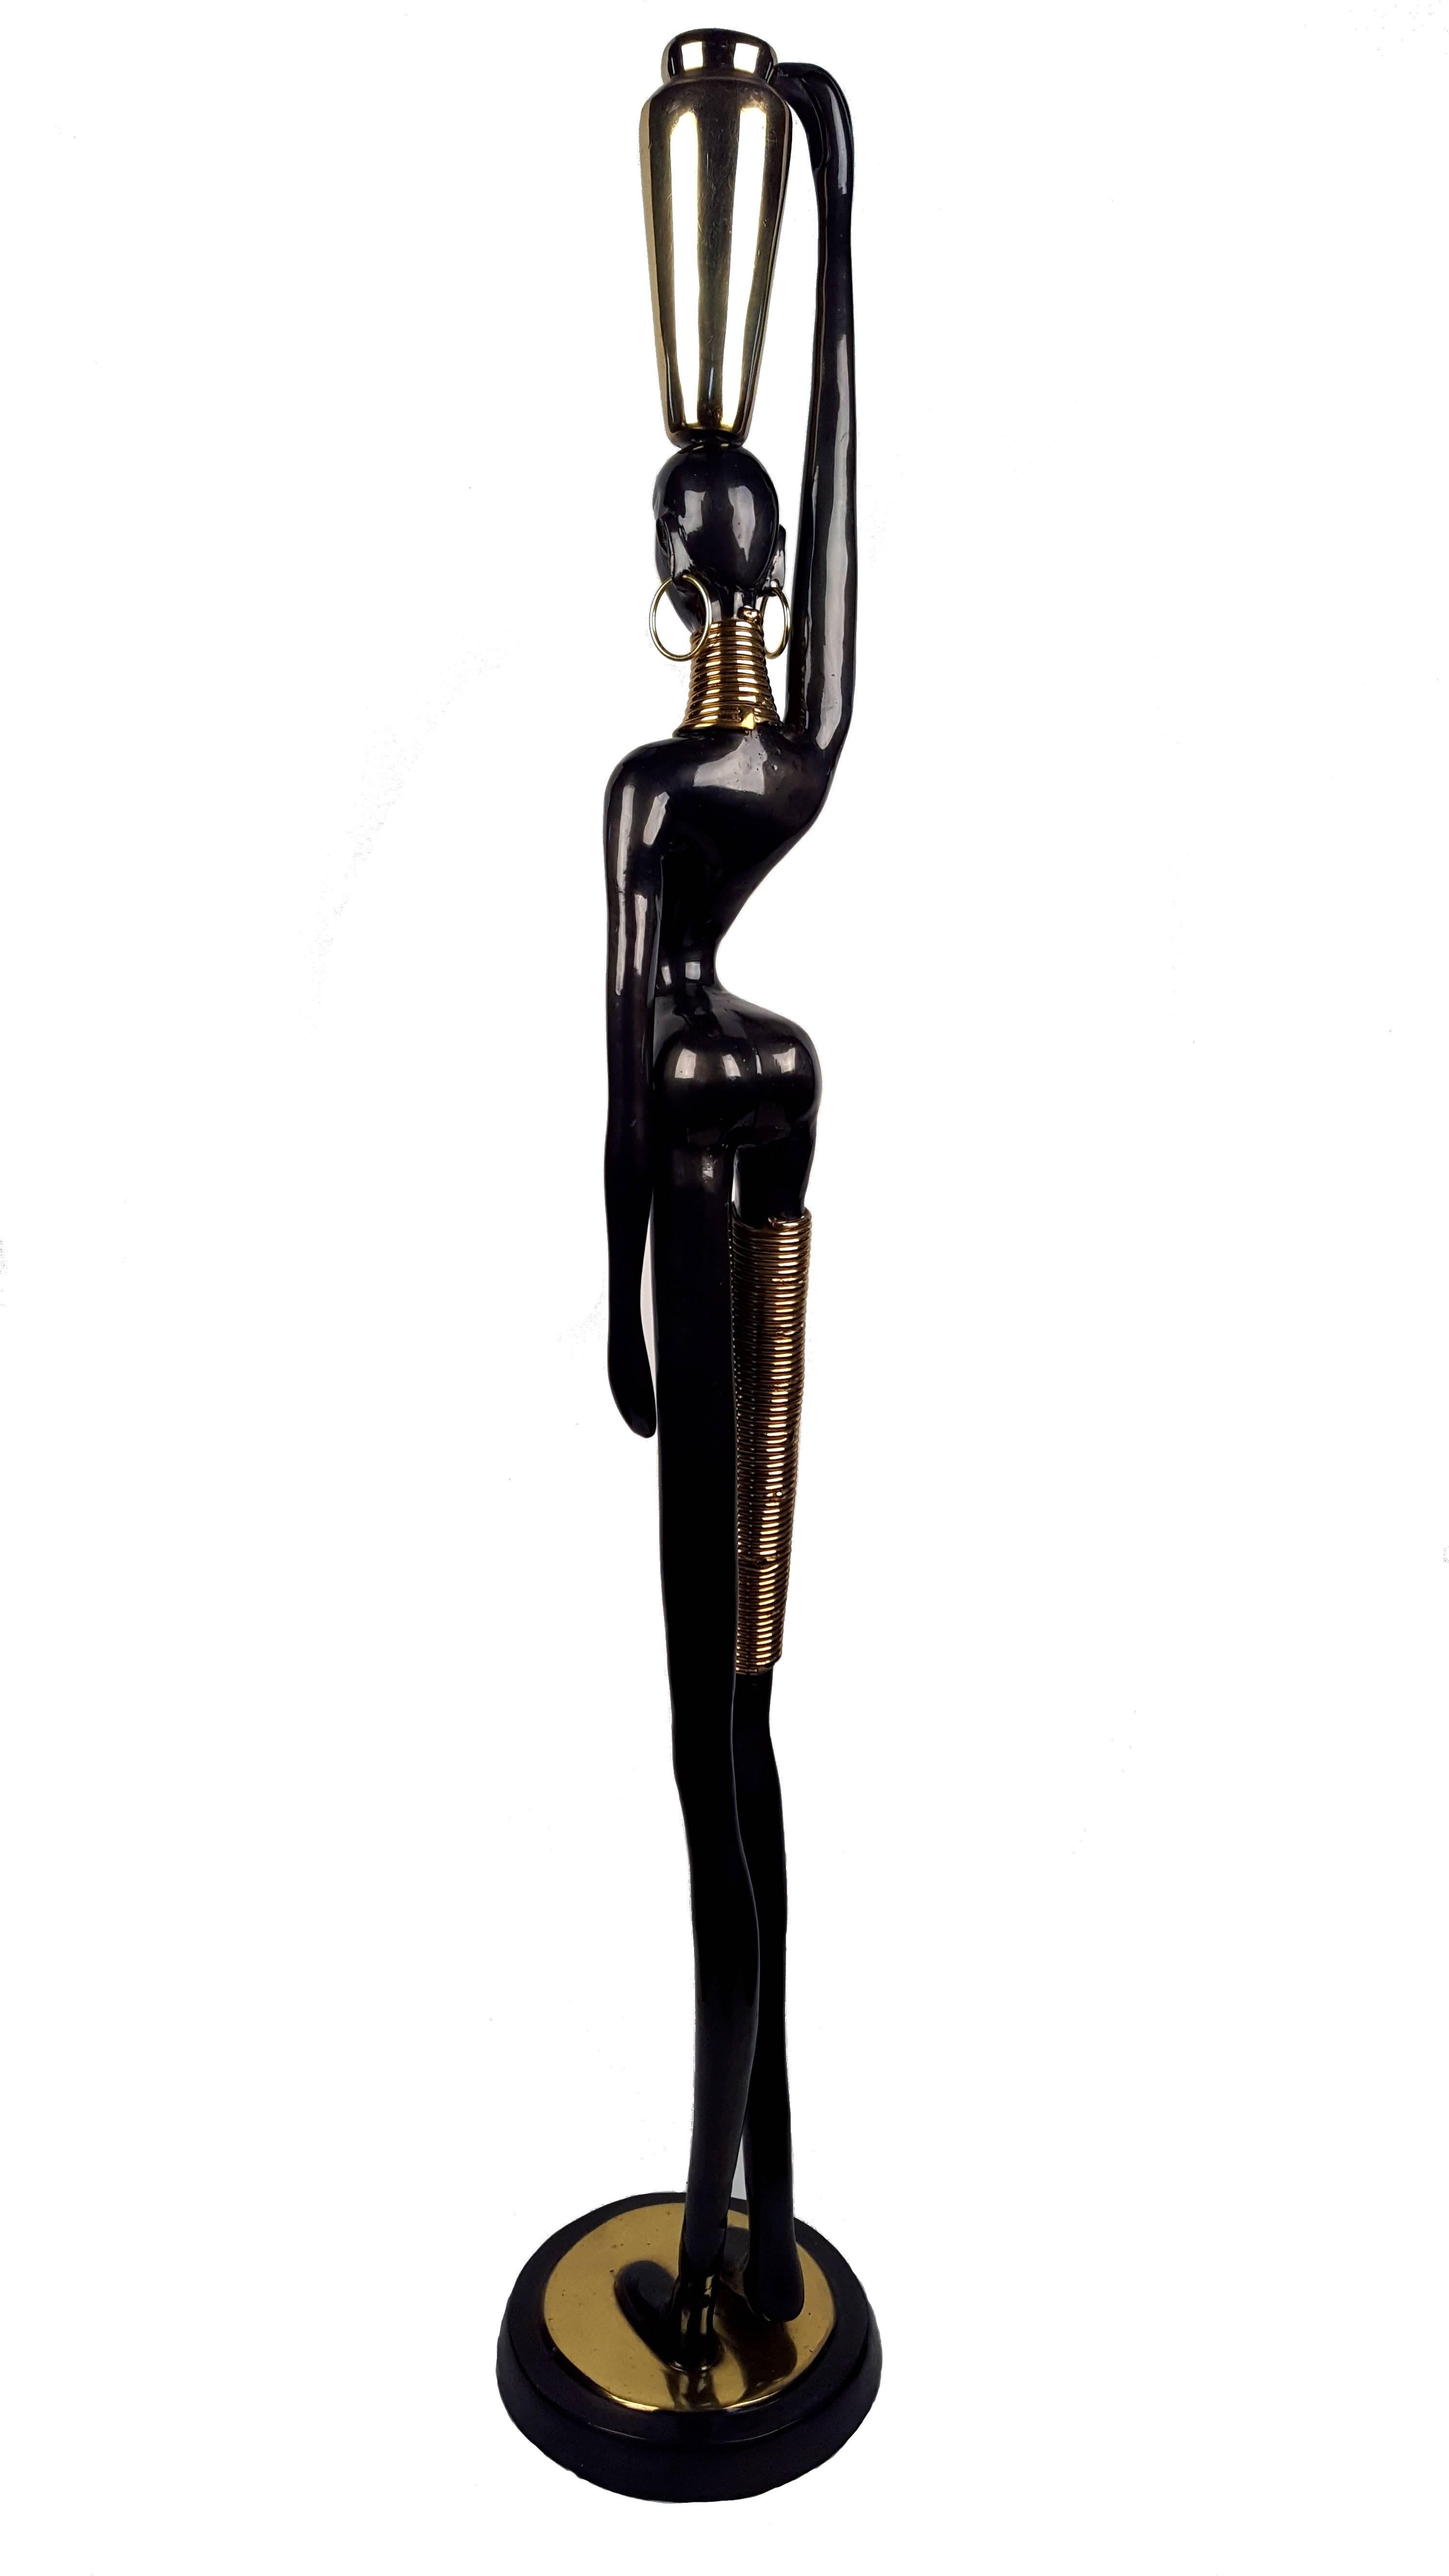 Bronze Ndebele African lady sculpture in Hagenauer style, “Africa in the jar”, circa 1950.

Measures: Height: 118 cm / 46.5 inch.
Diameter foot: 21 cm / 8.3 inch.

Ndebele women traditionally adorned themselves with a variety of ornaments, each